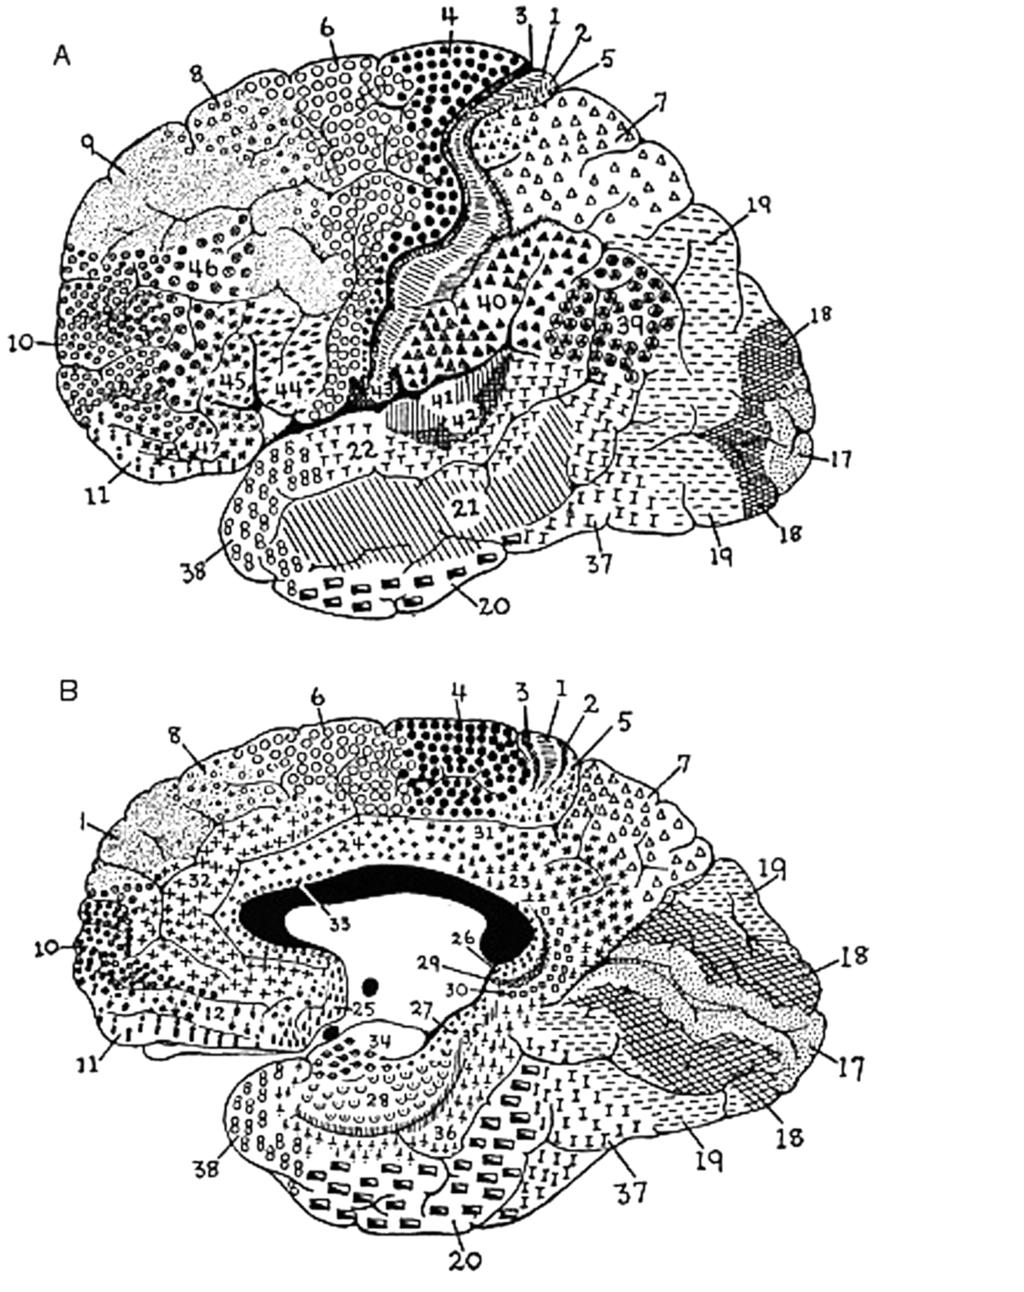 634 D.C. Krawczyk / Neuroscience and Biobehavioral Reviews 26 (2002) 631 664 Fig. 2. Sample maps of cortical architecture using Brodmann numbers. (A) Lateral view of left hemisphere. B. Medial view of right hemisphere.